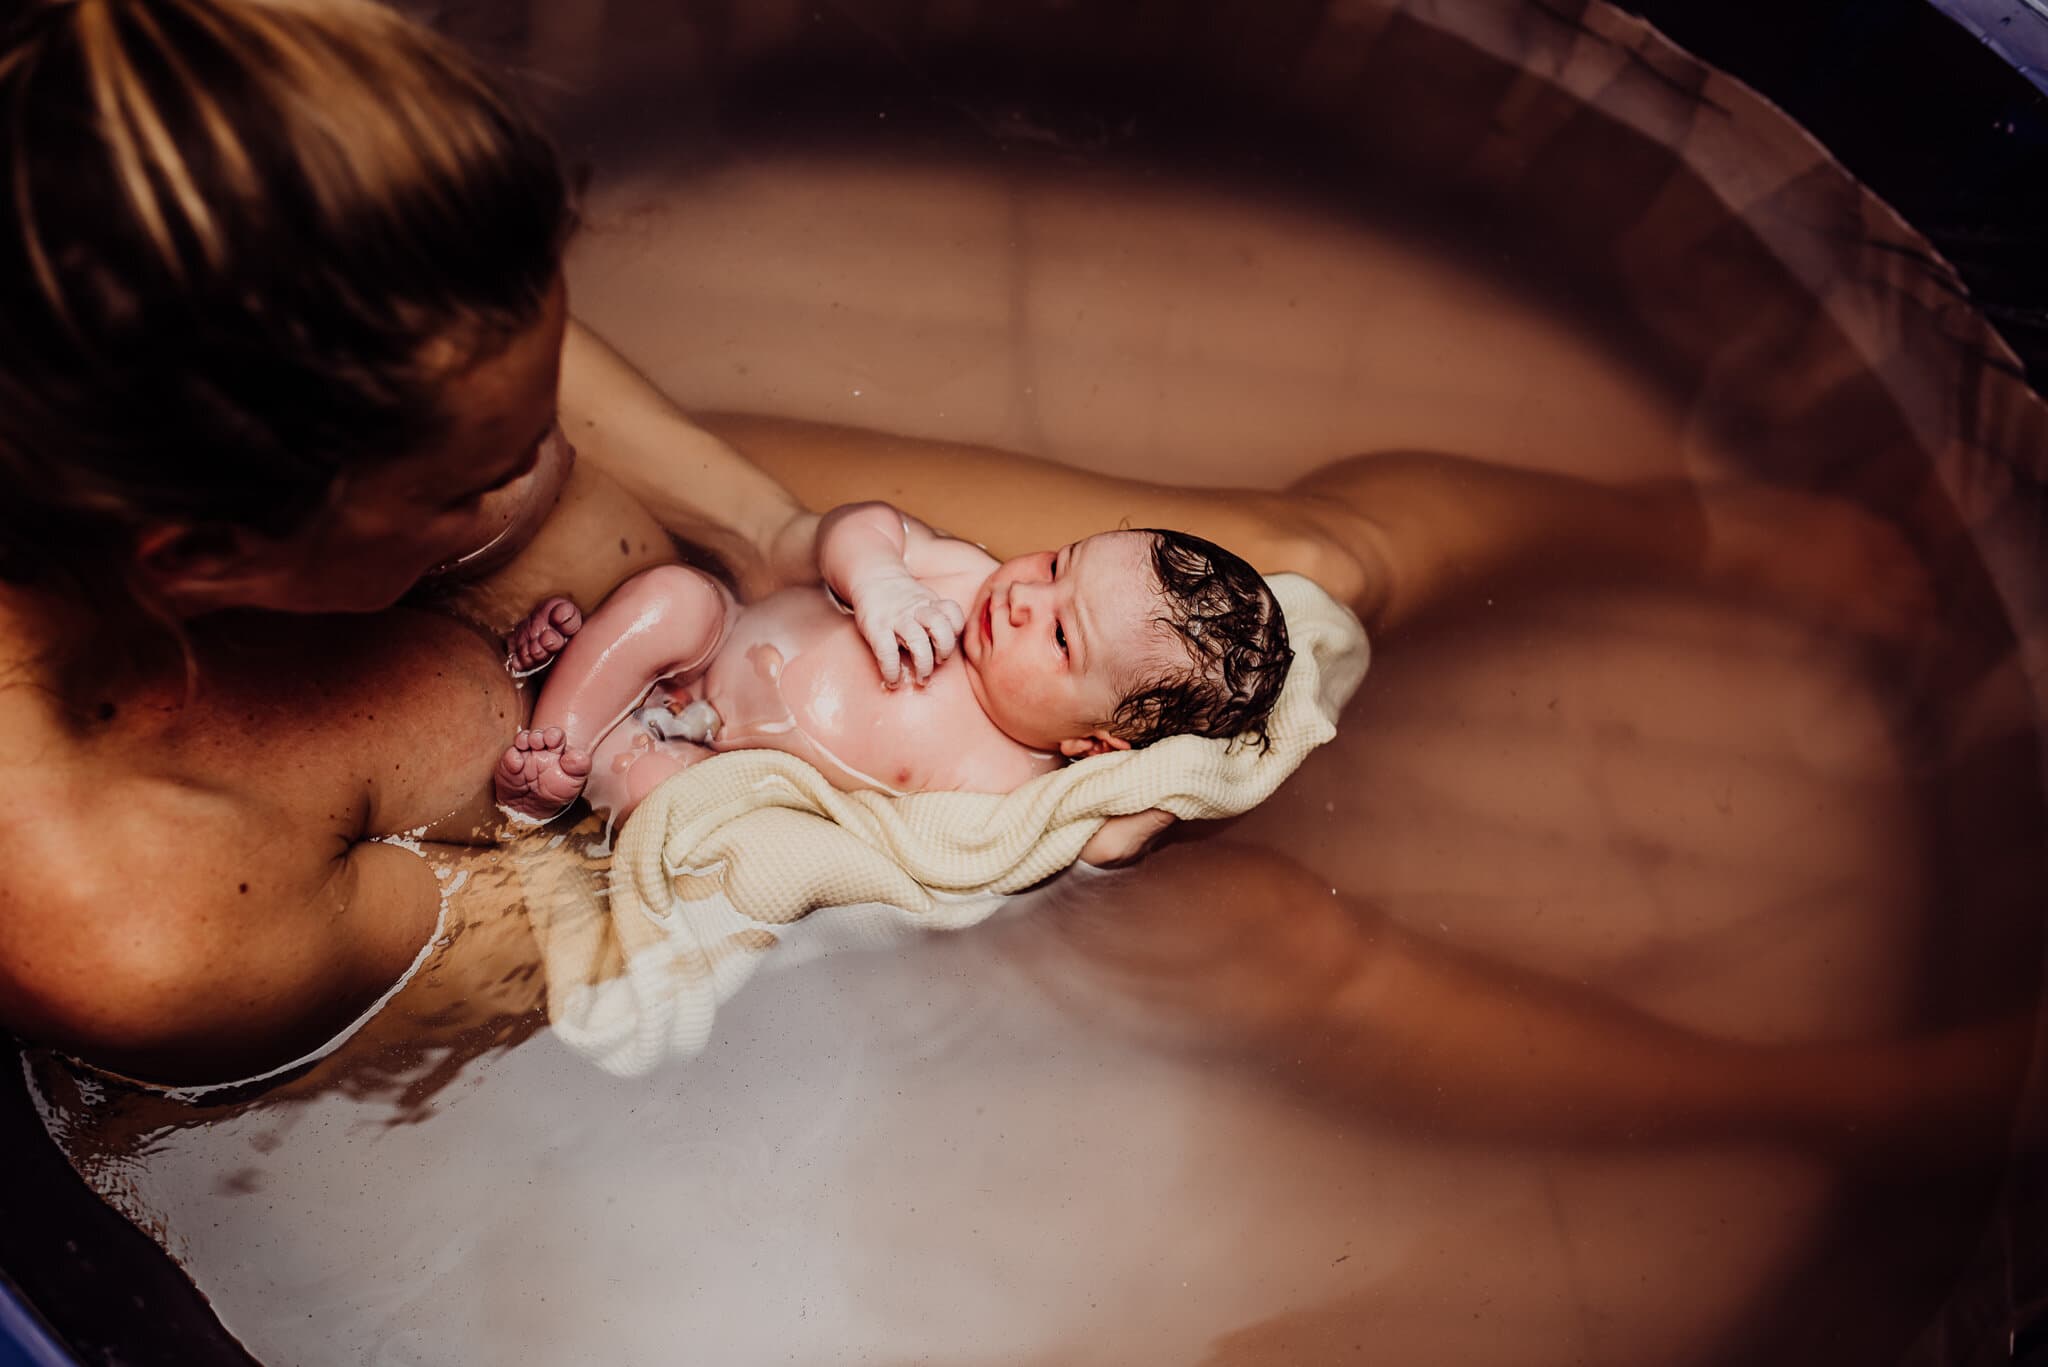 At home water bath tub birth labor delivery midwife baby story-38.jpg